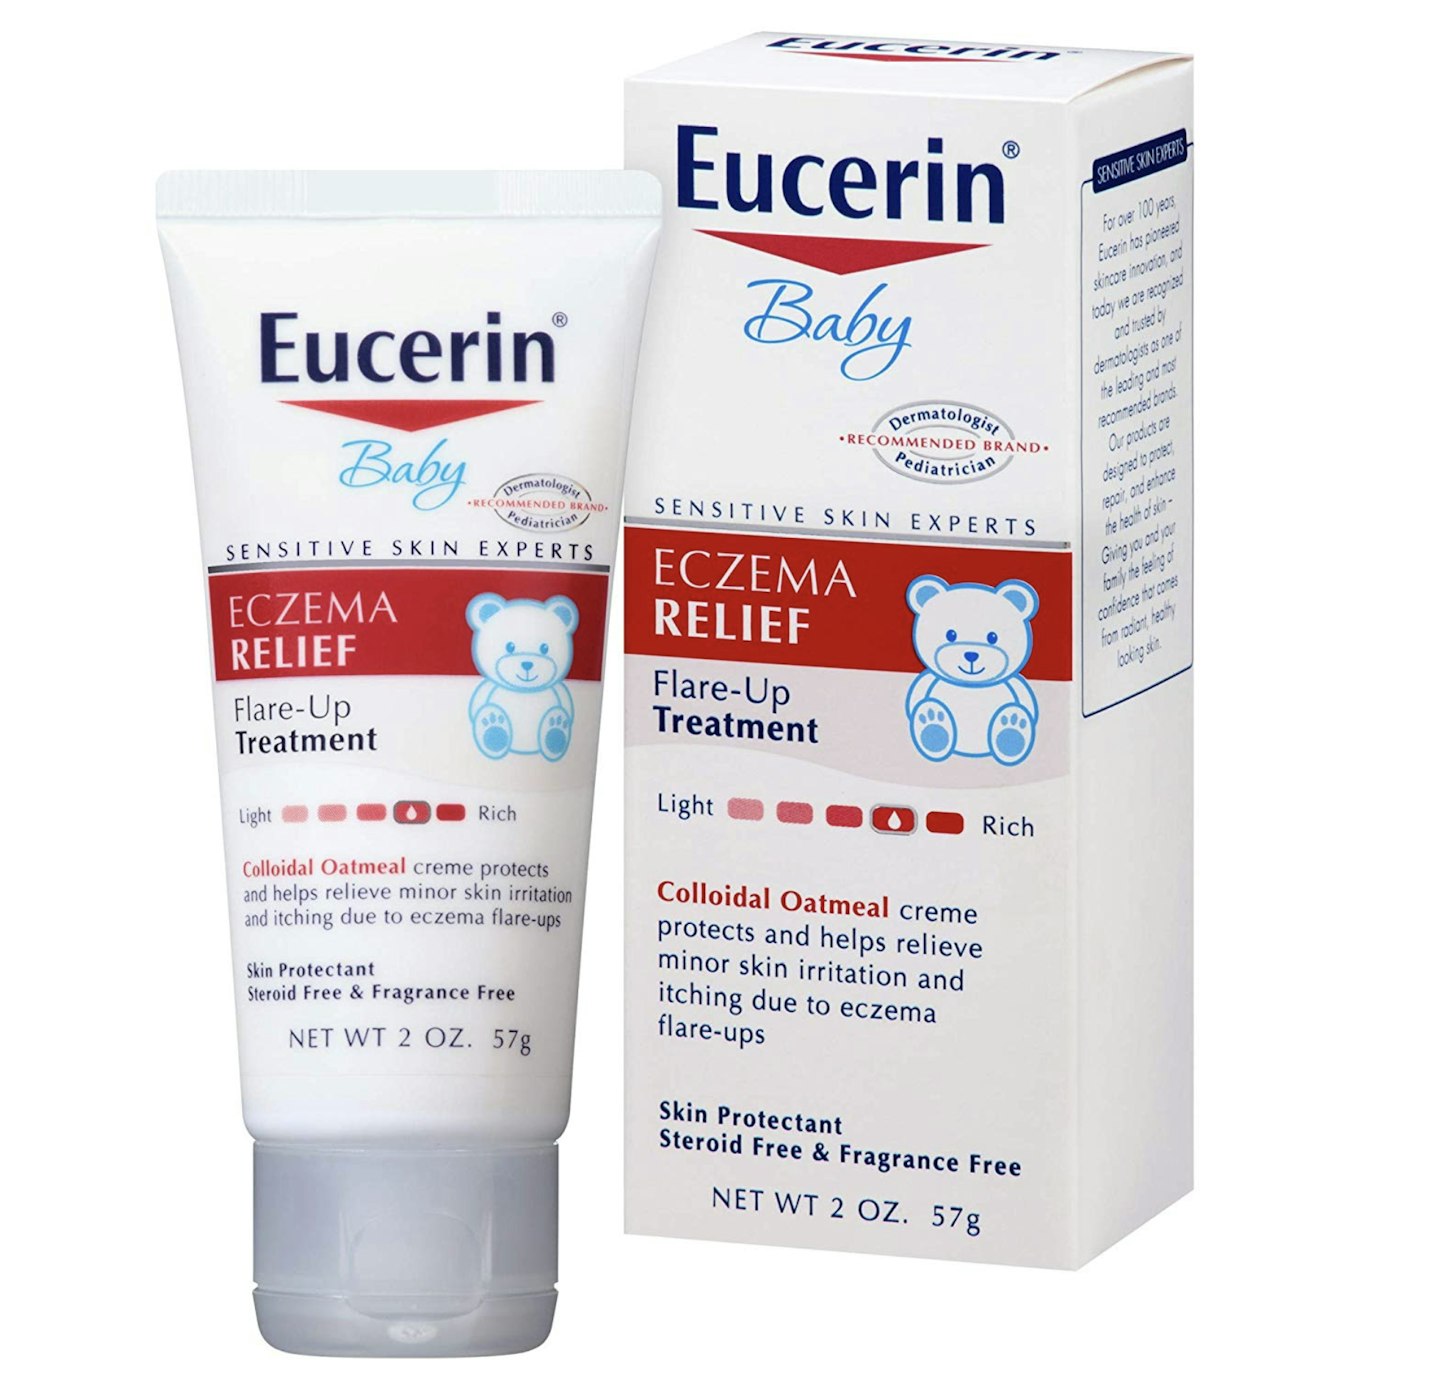 Eucerin Baby Eczema Relief Instant Therapy Creme